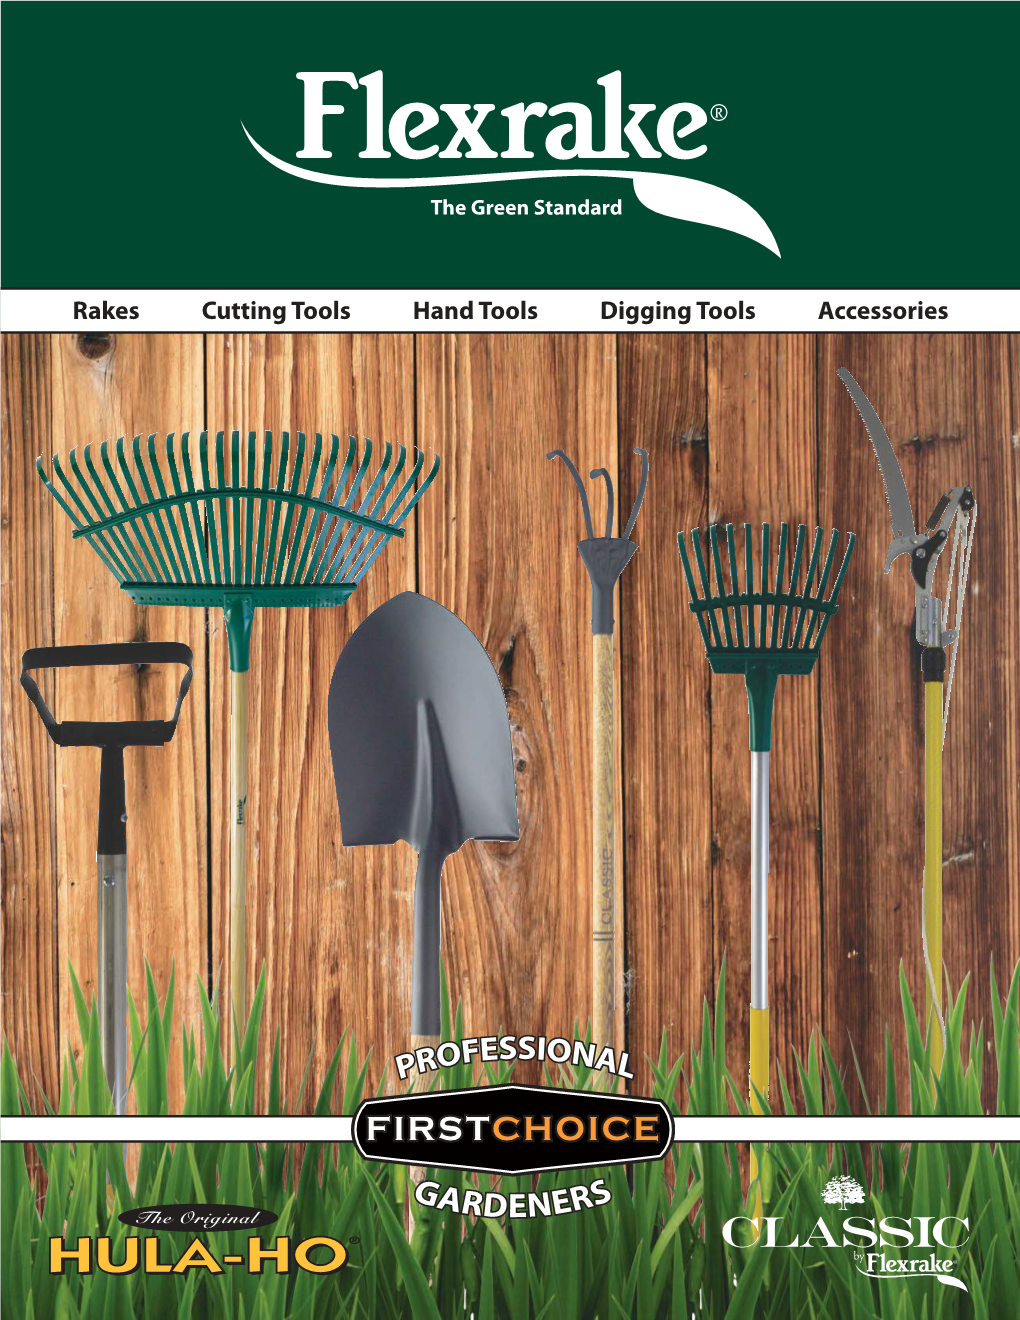 Rakes Cutting Tools Hand Tools Digging Tools Accessories California Flexrake® Corporation 02 About / Warranty